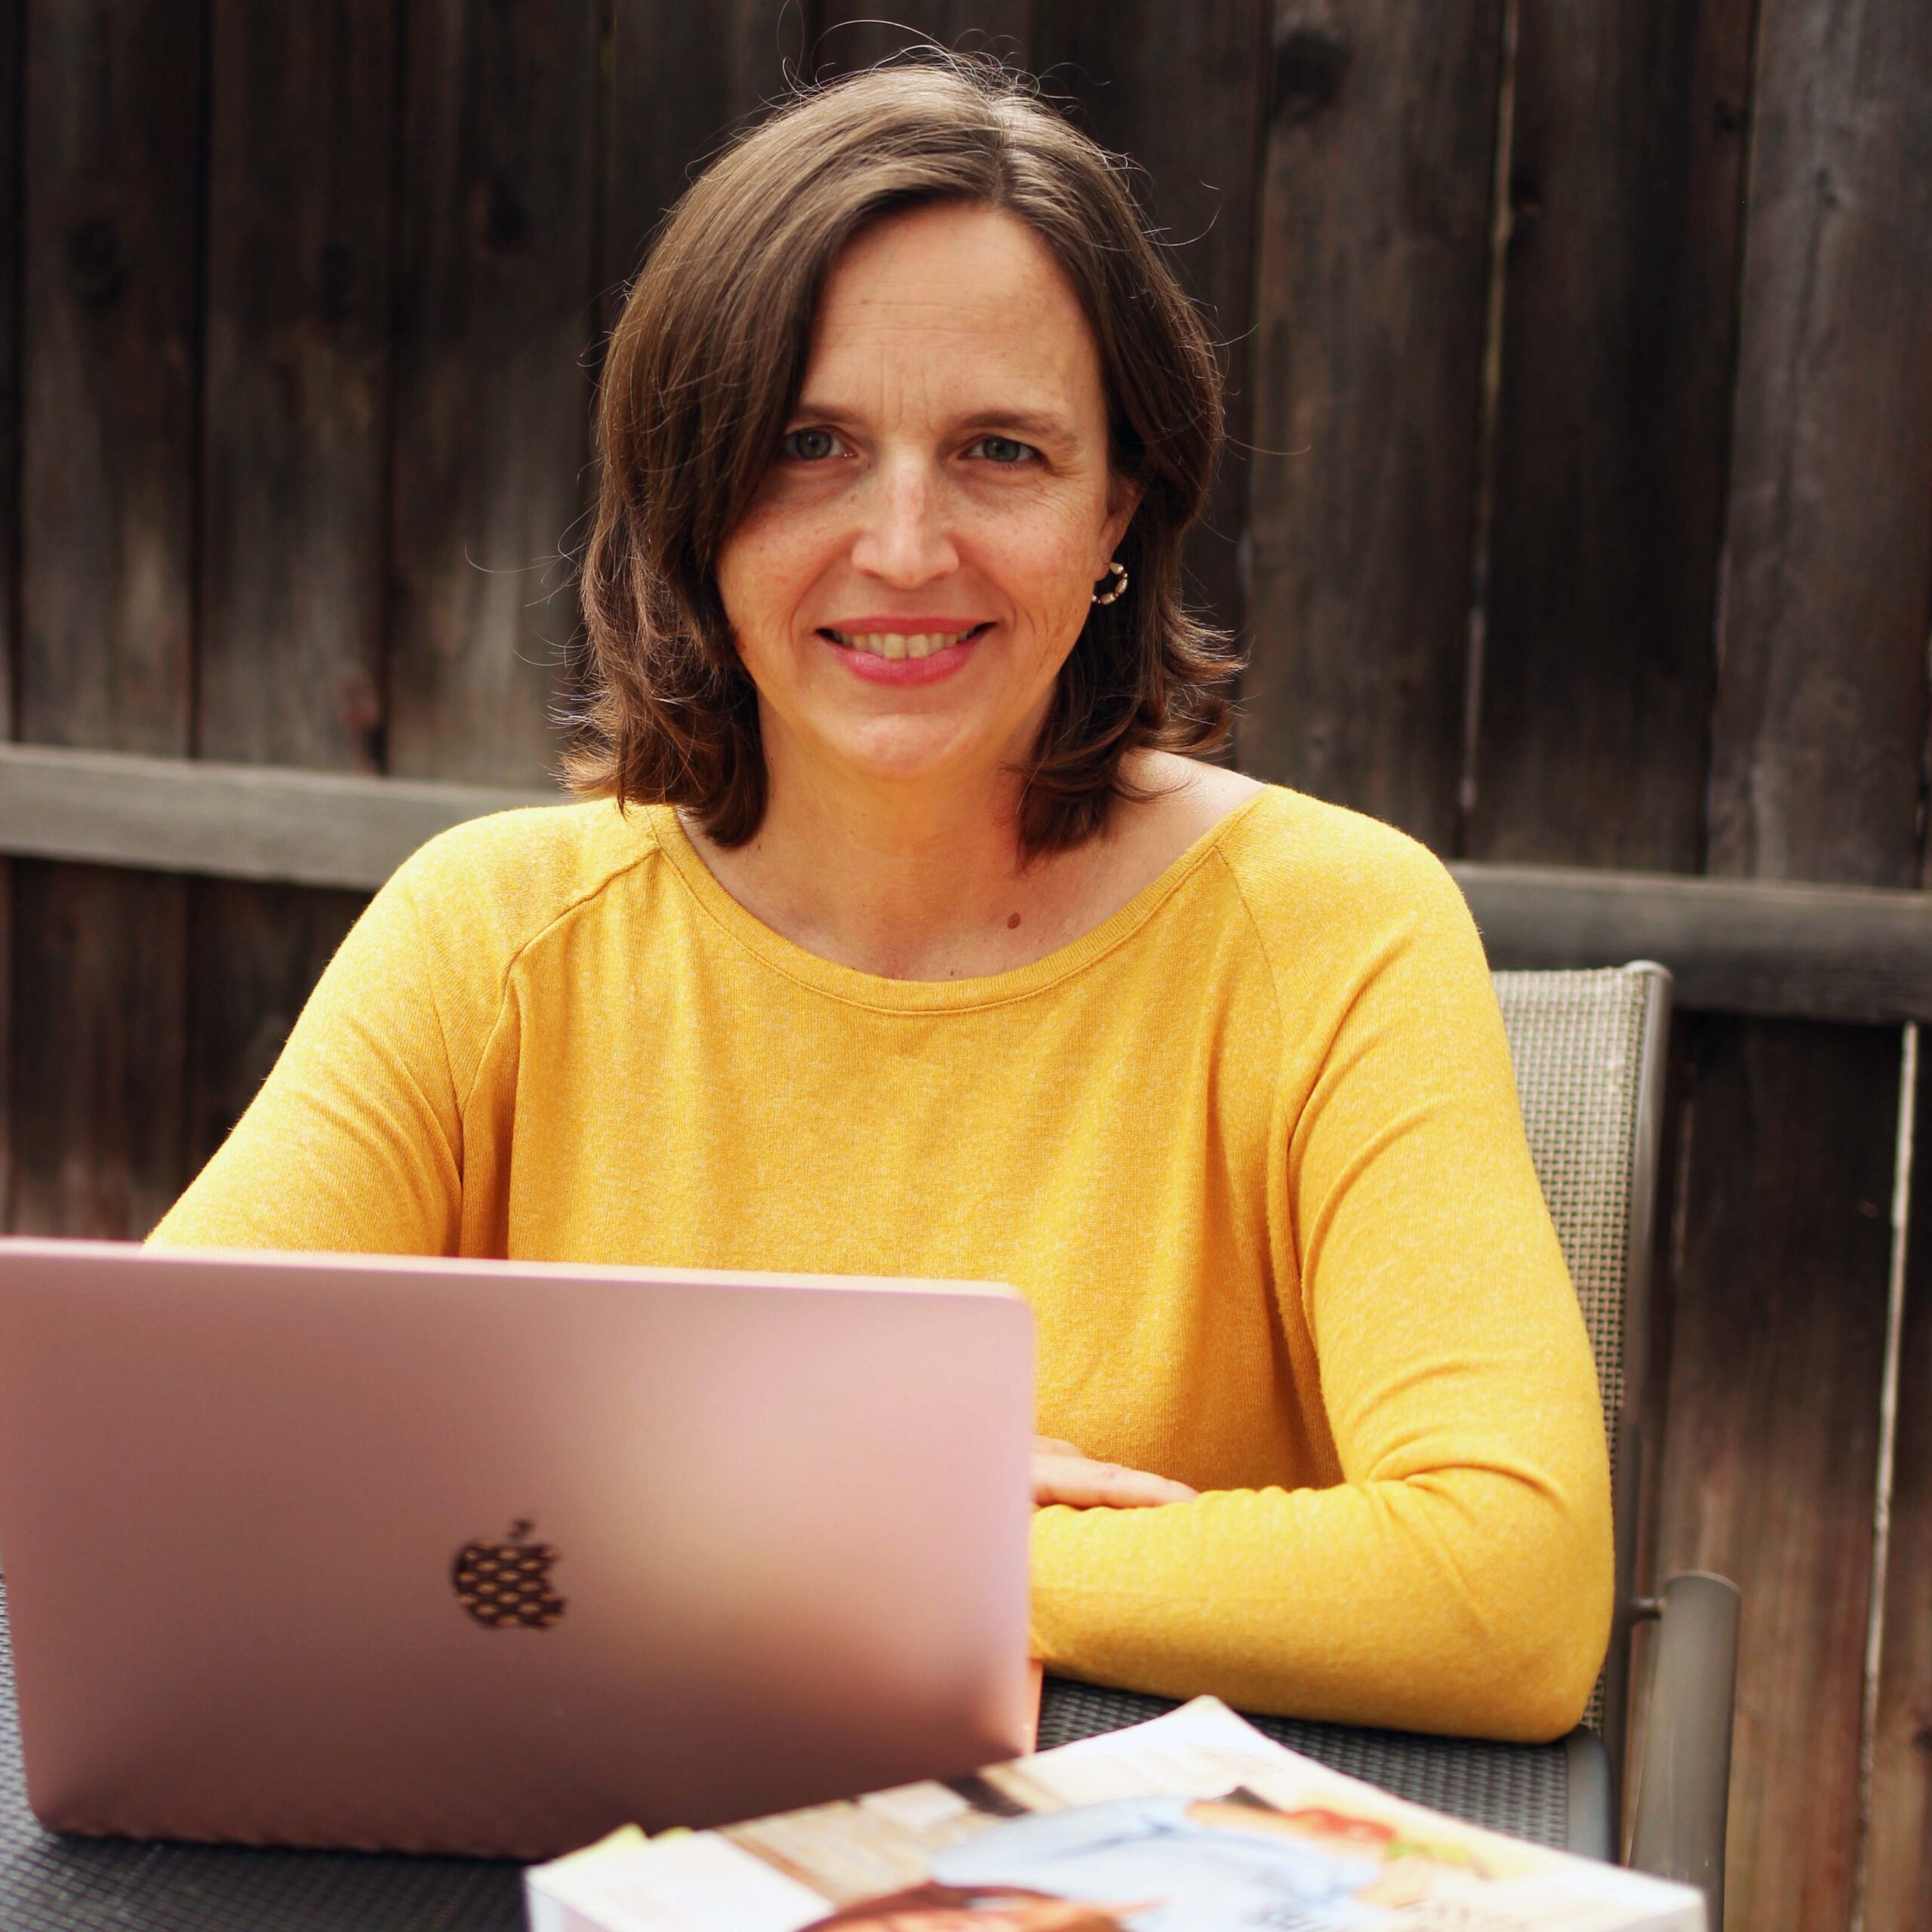 A woman sitting at a table with a laptop and smiling at the camera